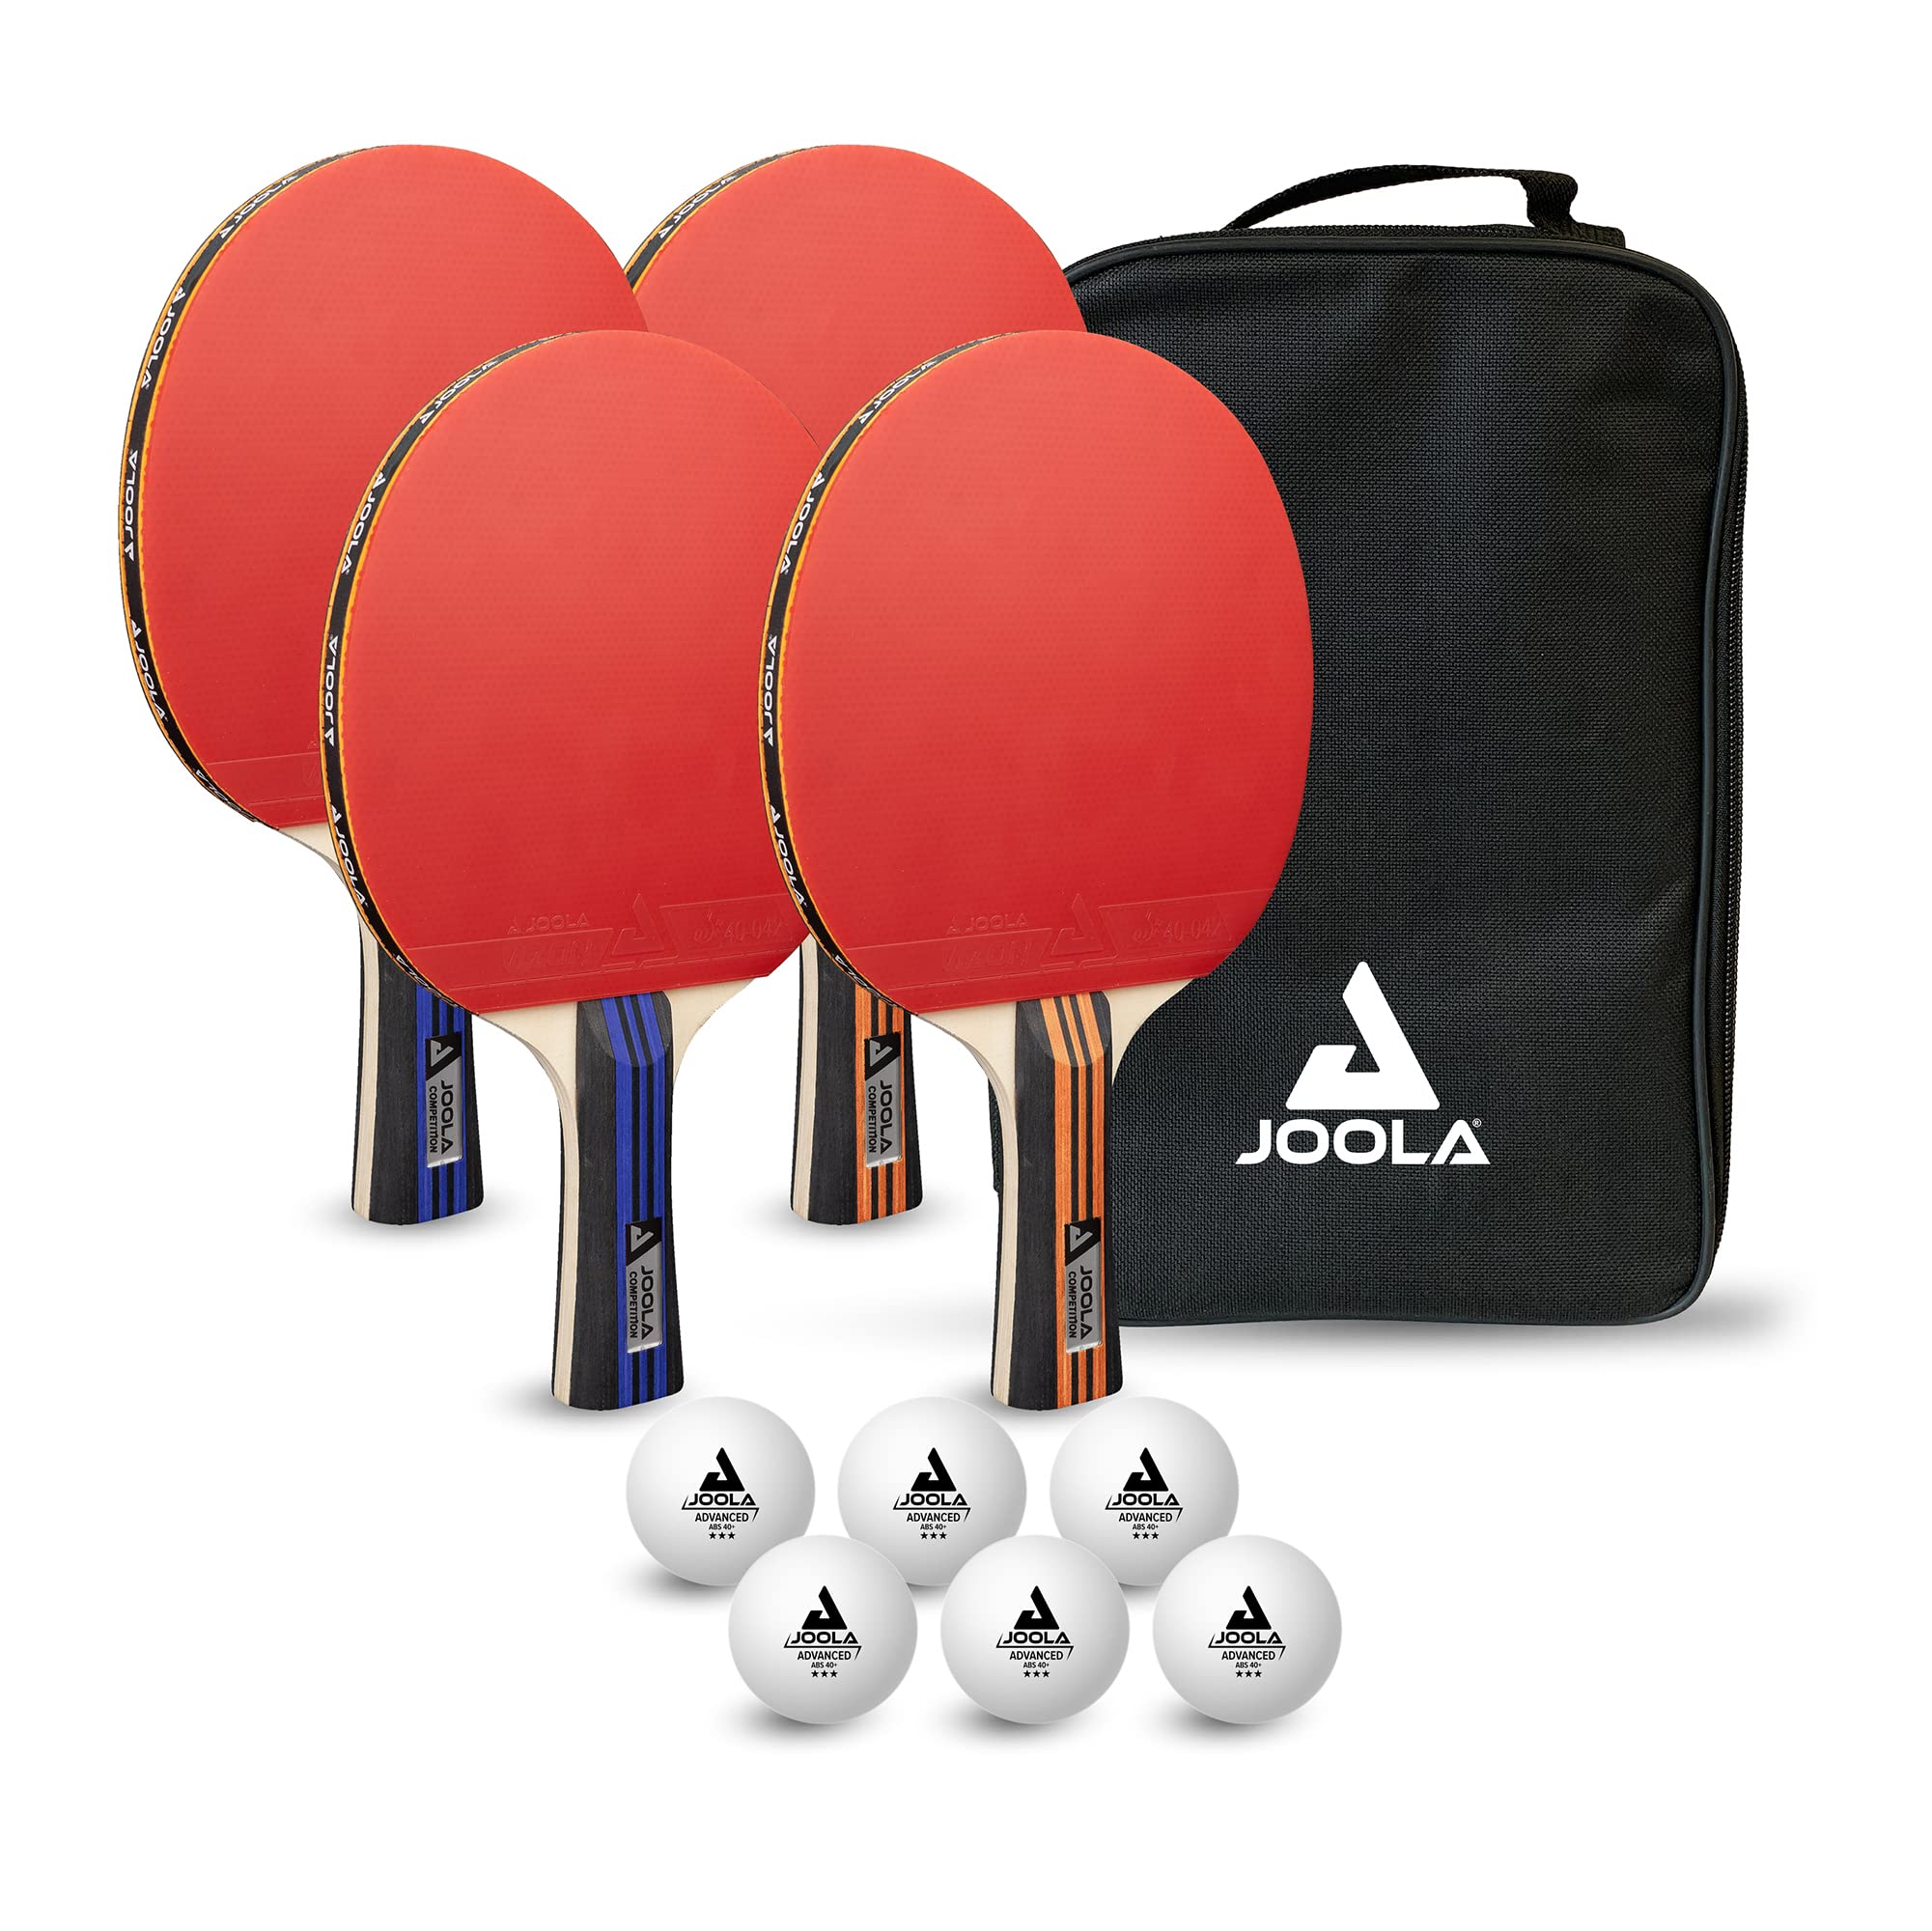 JOOLA Advanced Table Tennis Paddle Set - Includes 4 Ping Pong Paddles, 6 3-Star Ping Pong Balls & carrying case - for Intermedia